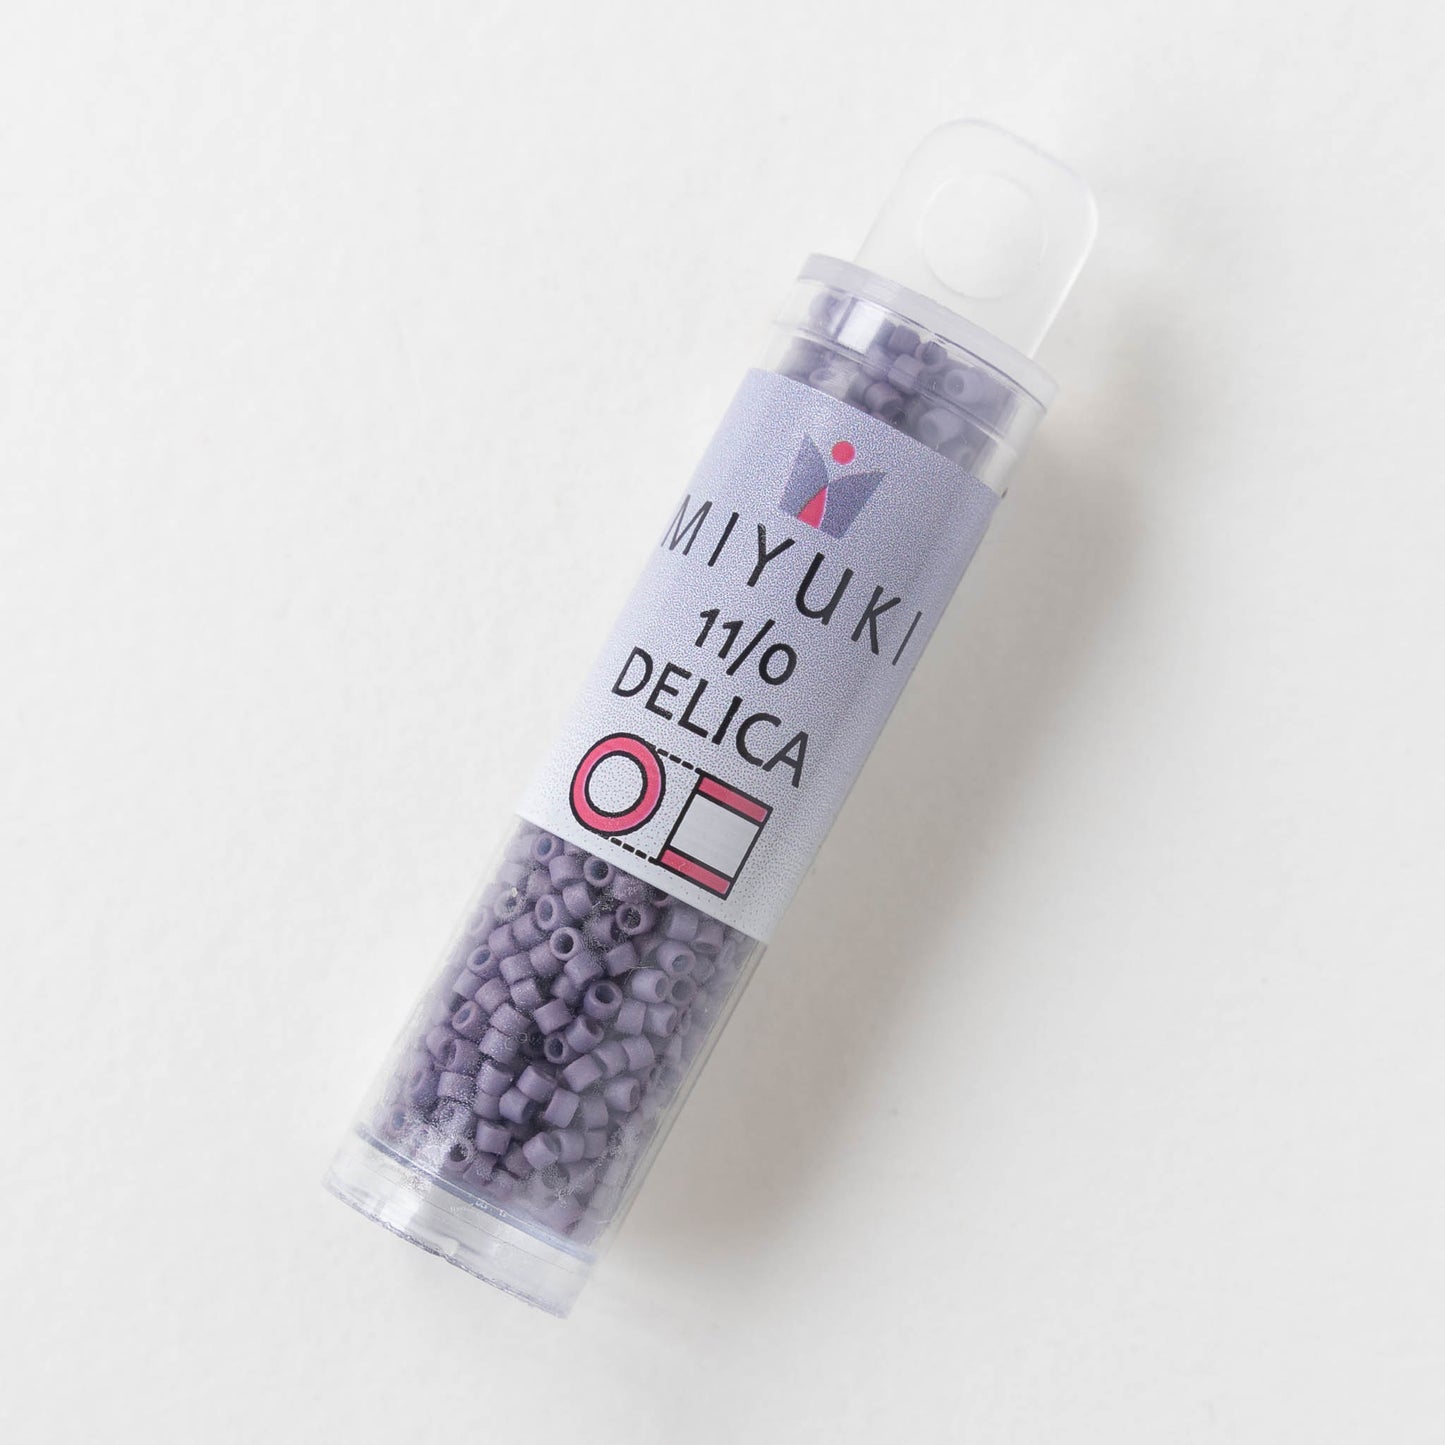 Load image into Gallery viewer, 11/0 Delica Seed Beads - Opaque Purple Grape Matte - 2 Inch Tube
